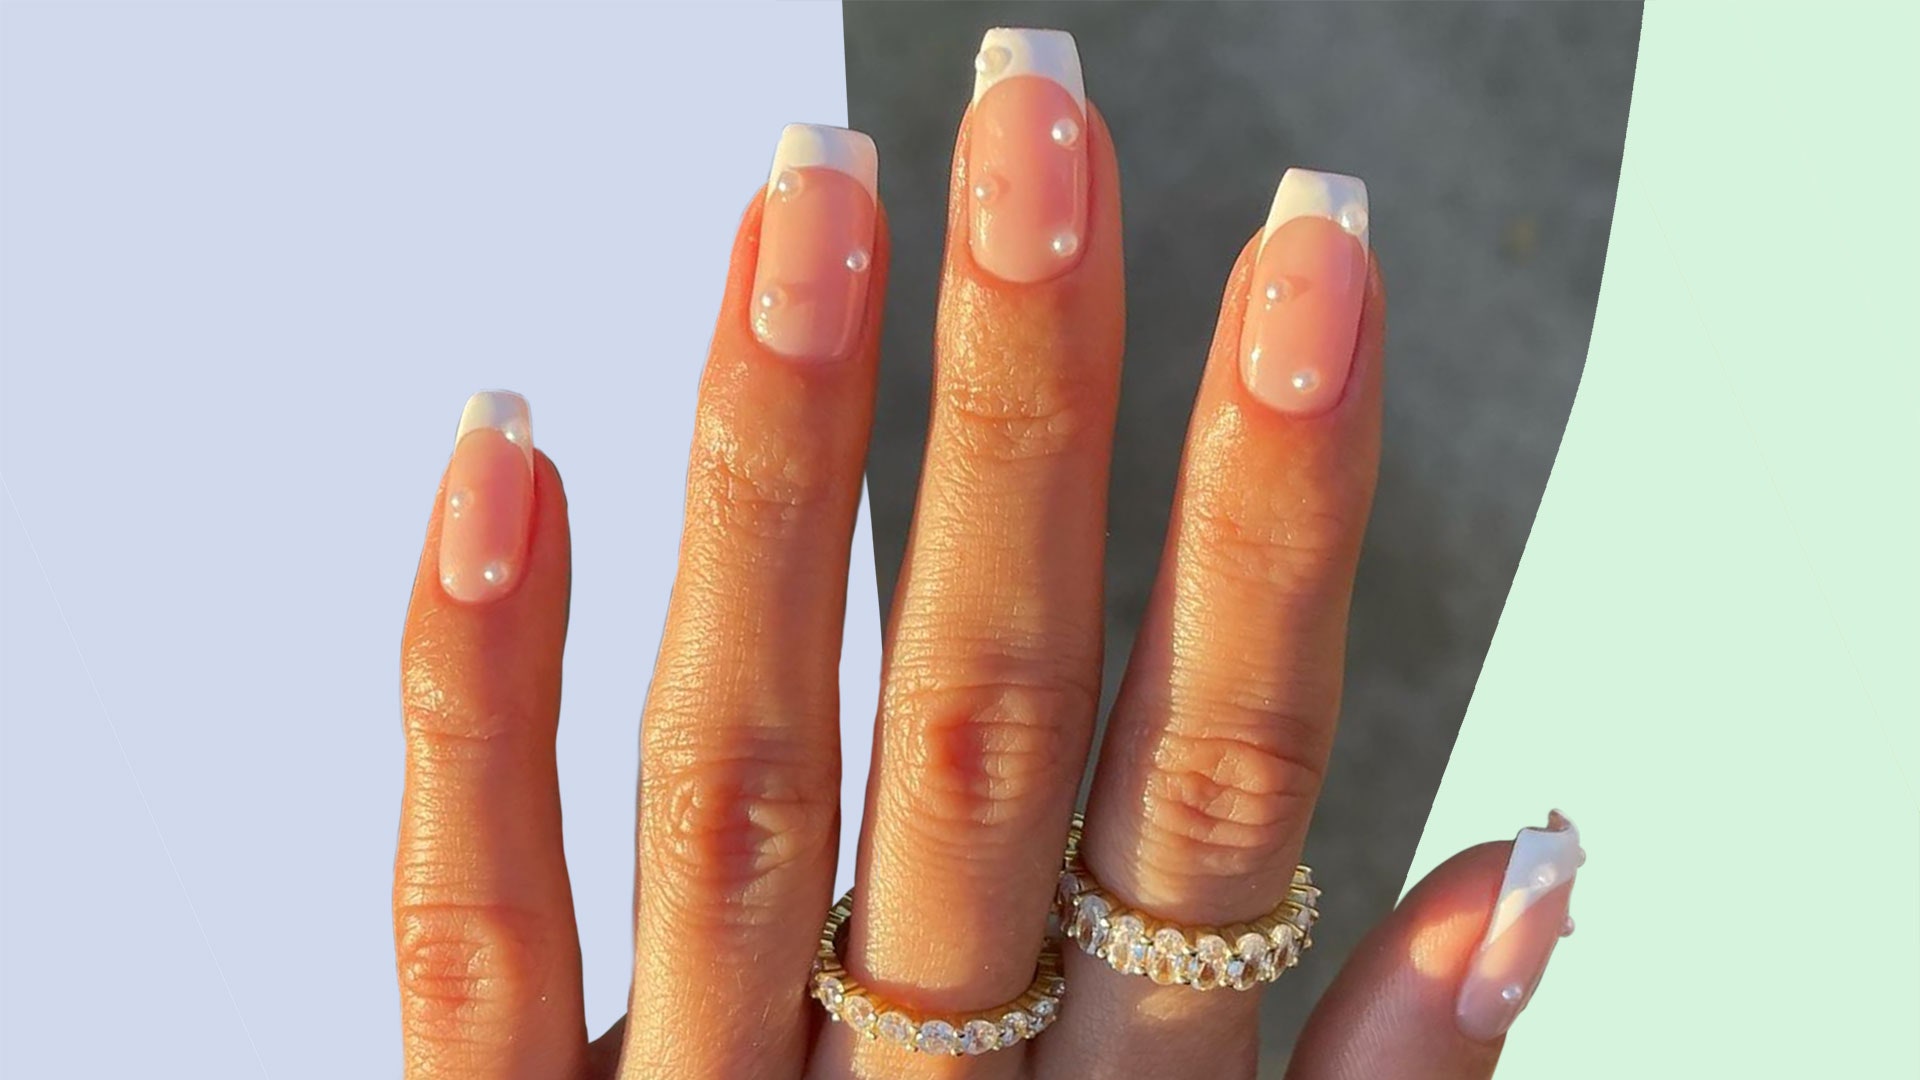 4. Nail designs with jewels and pearls - wide 2